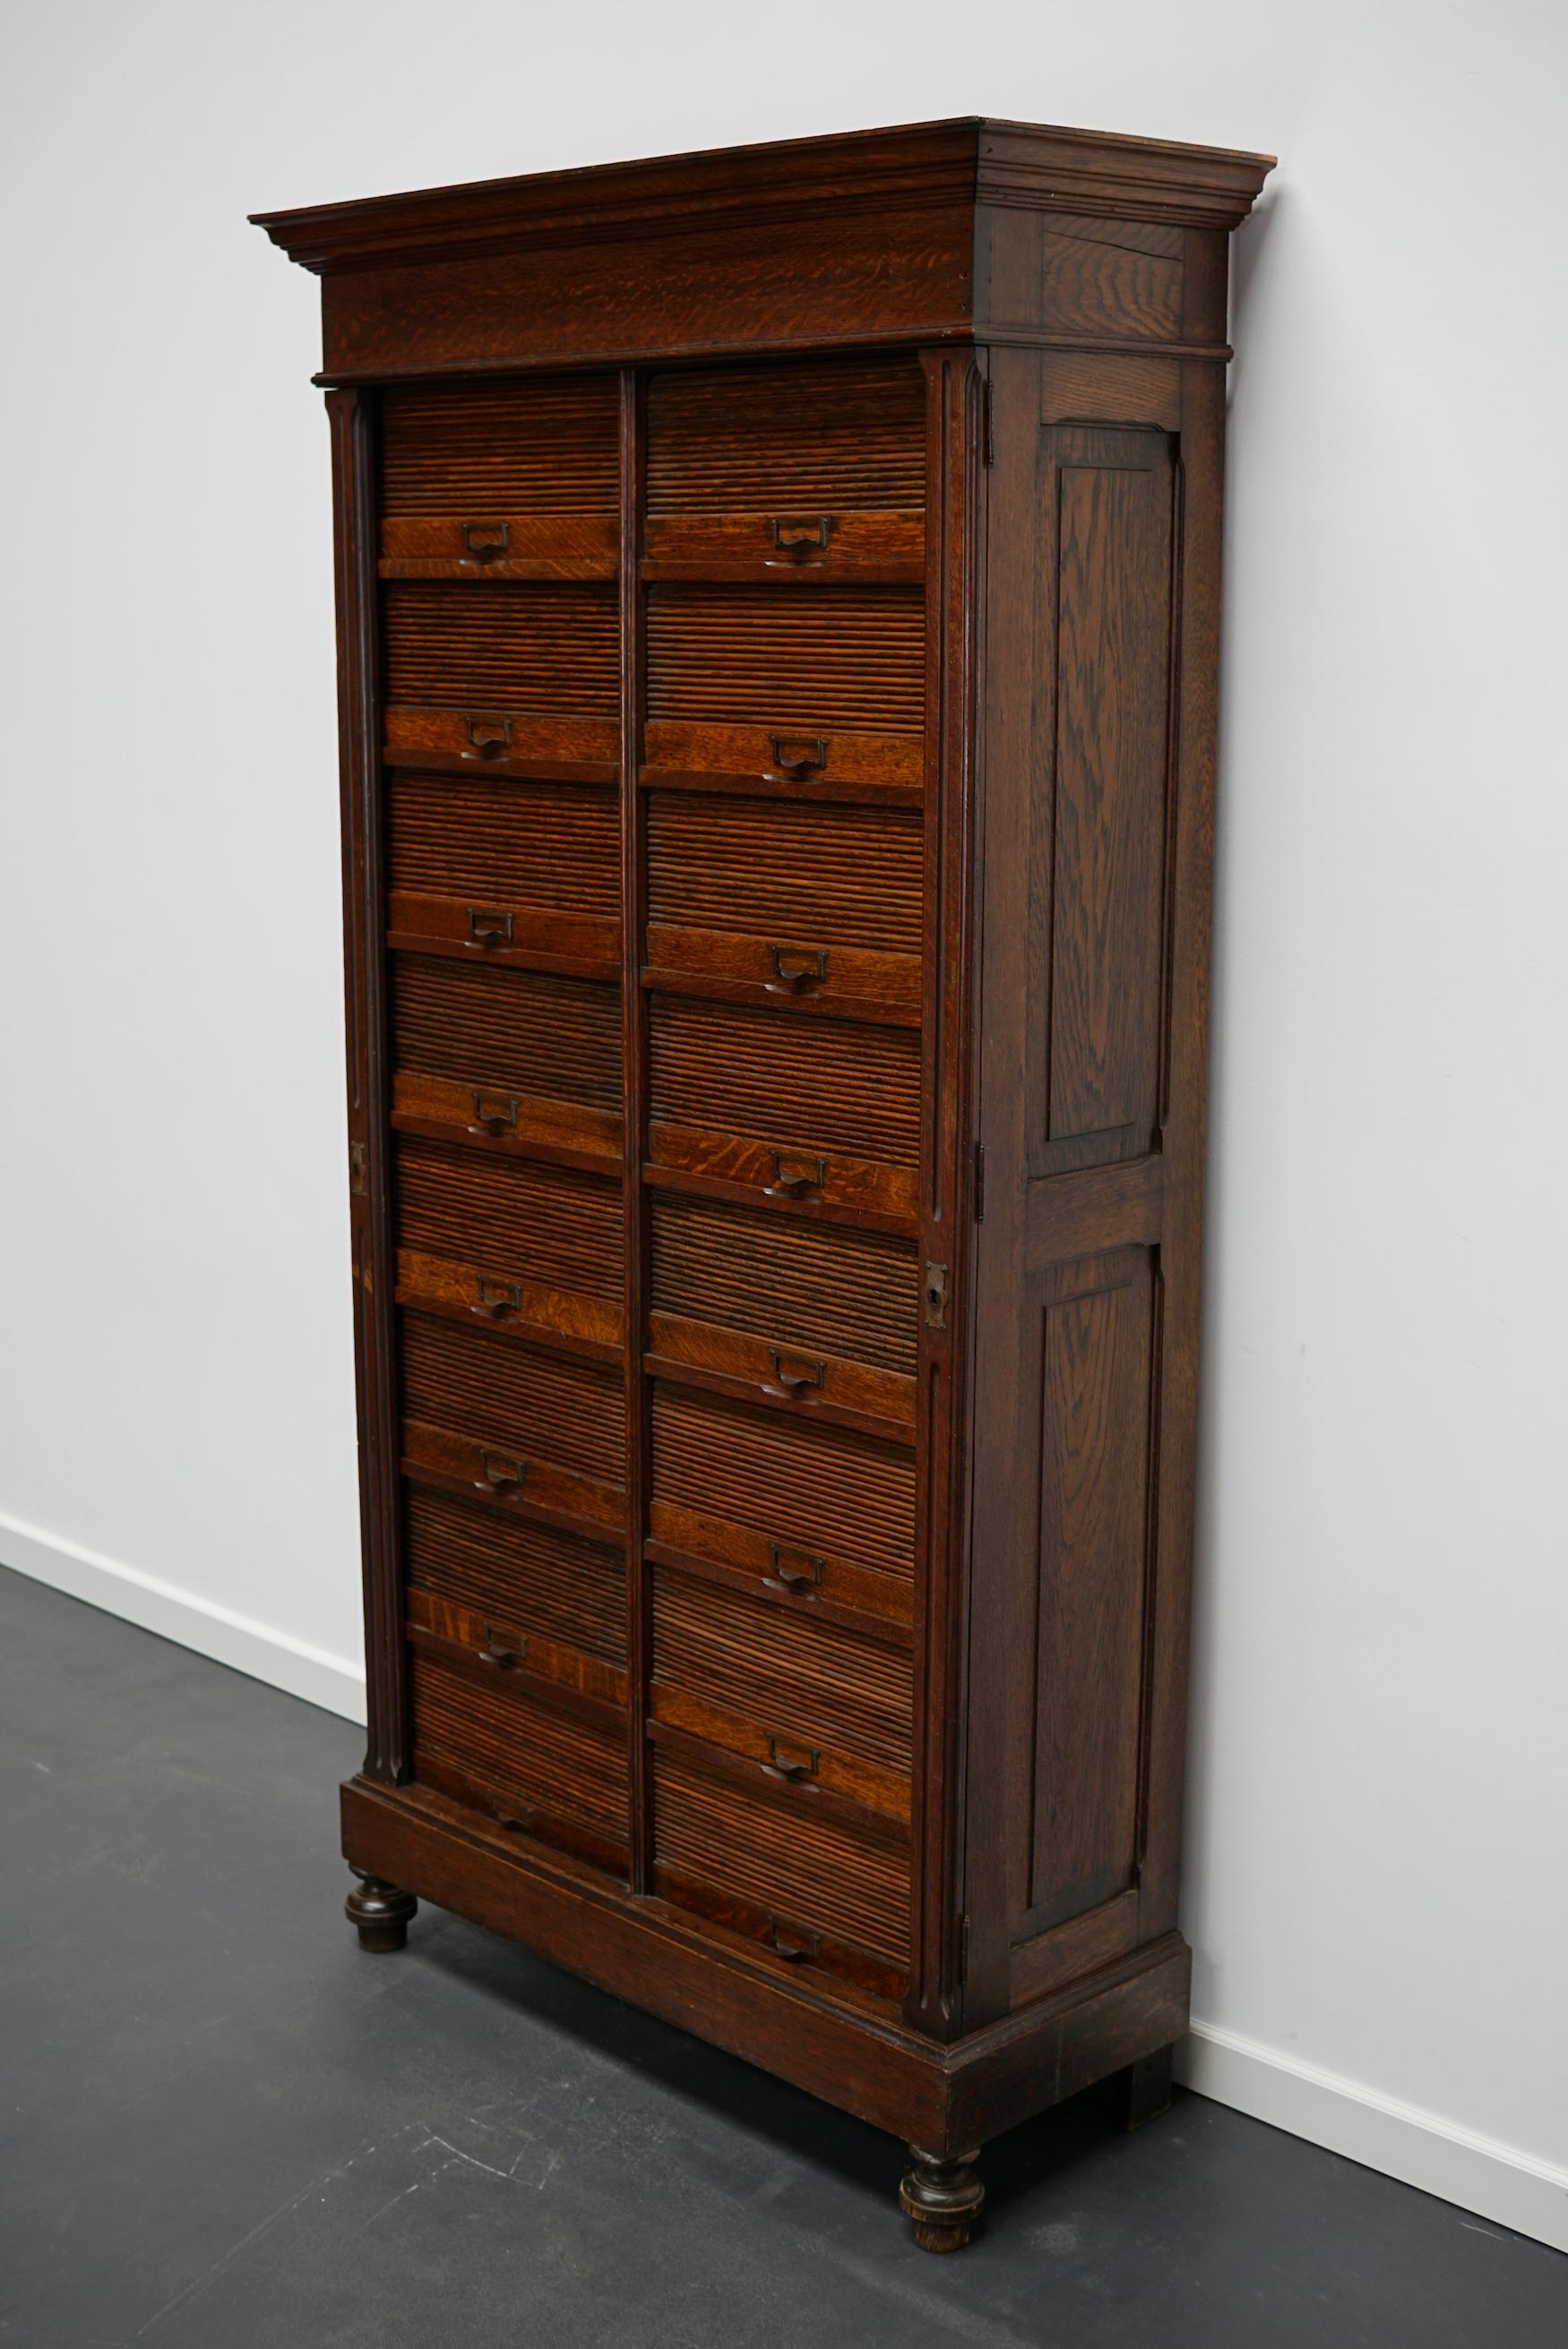 Very nice oak filing cabinet from the early 20th century with 16 tambour doors. The interior dimensions of the compartments are A4 paper size.